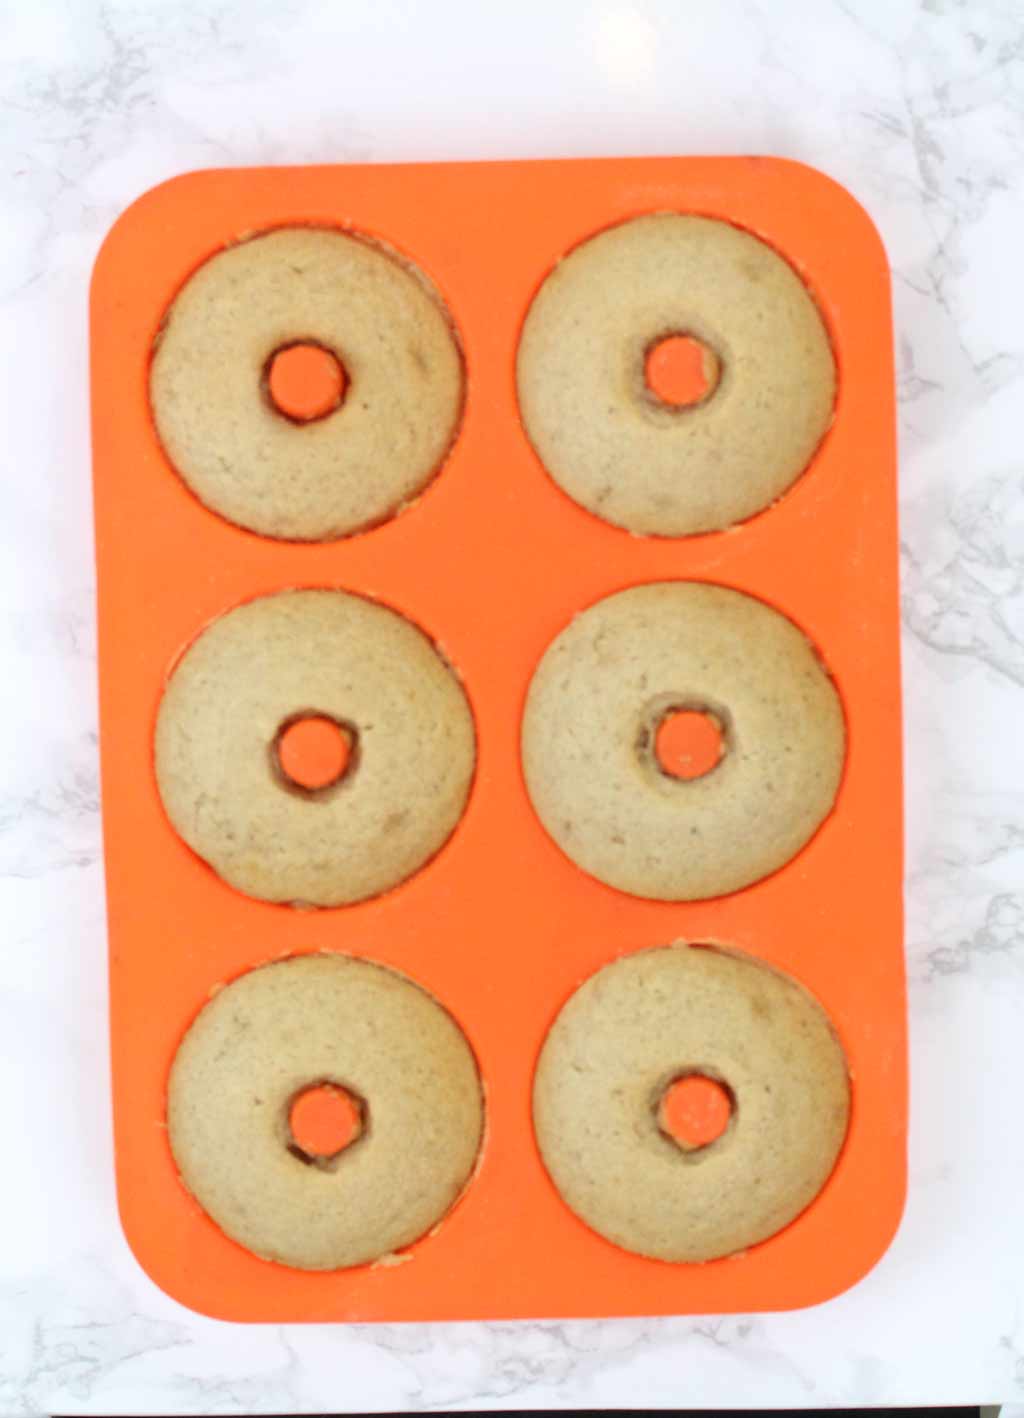 6 baked donuts in a donut mould